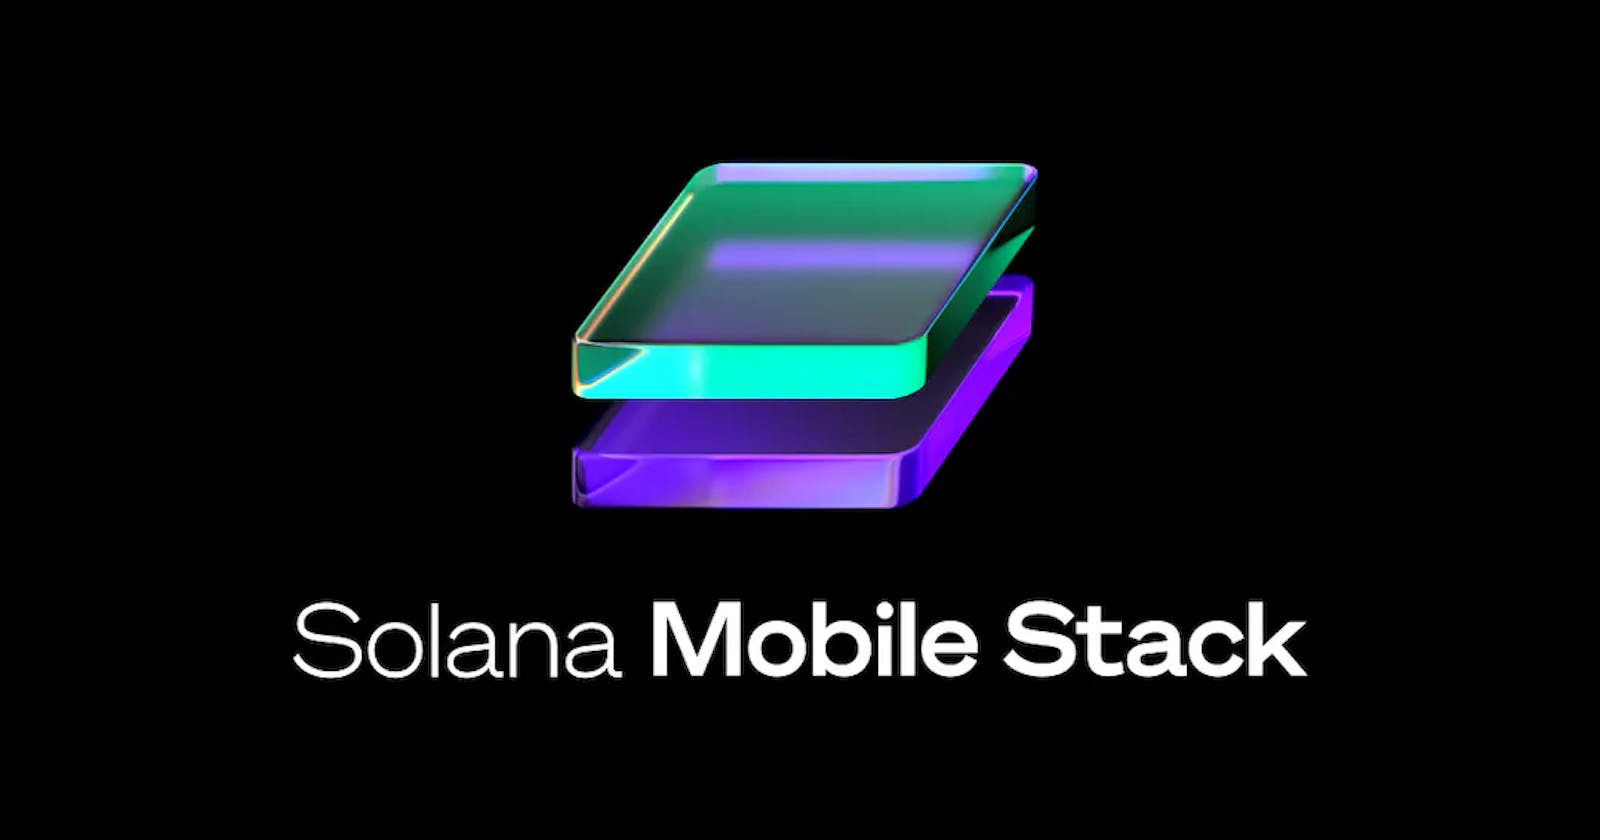 📲 Building a decentralized Mobile Application on Solana